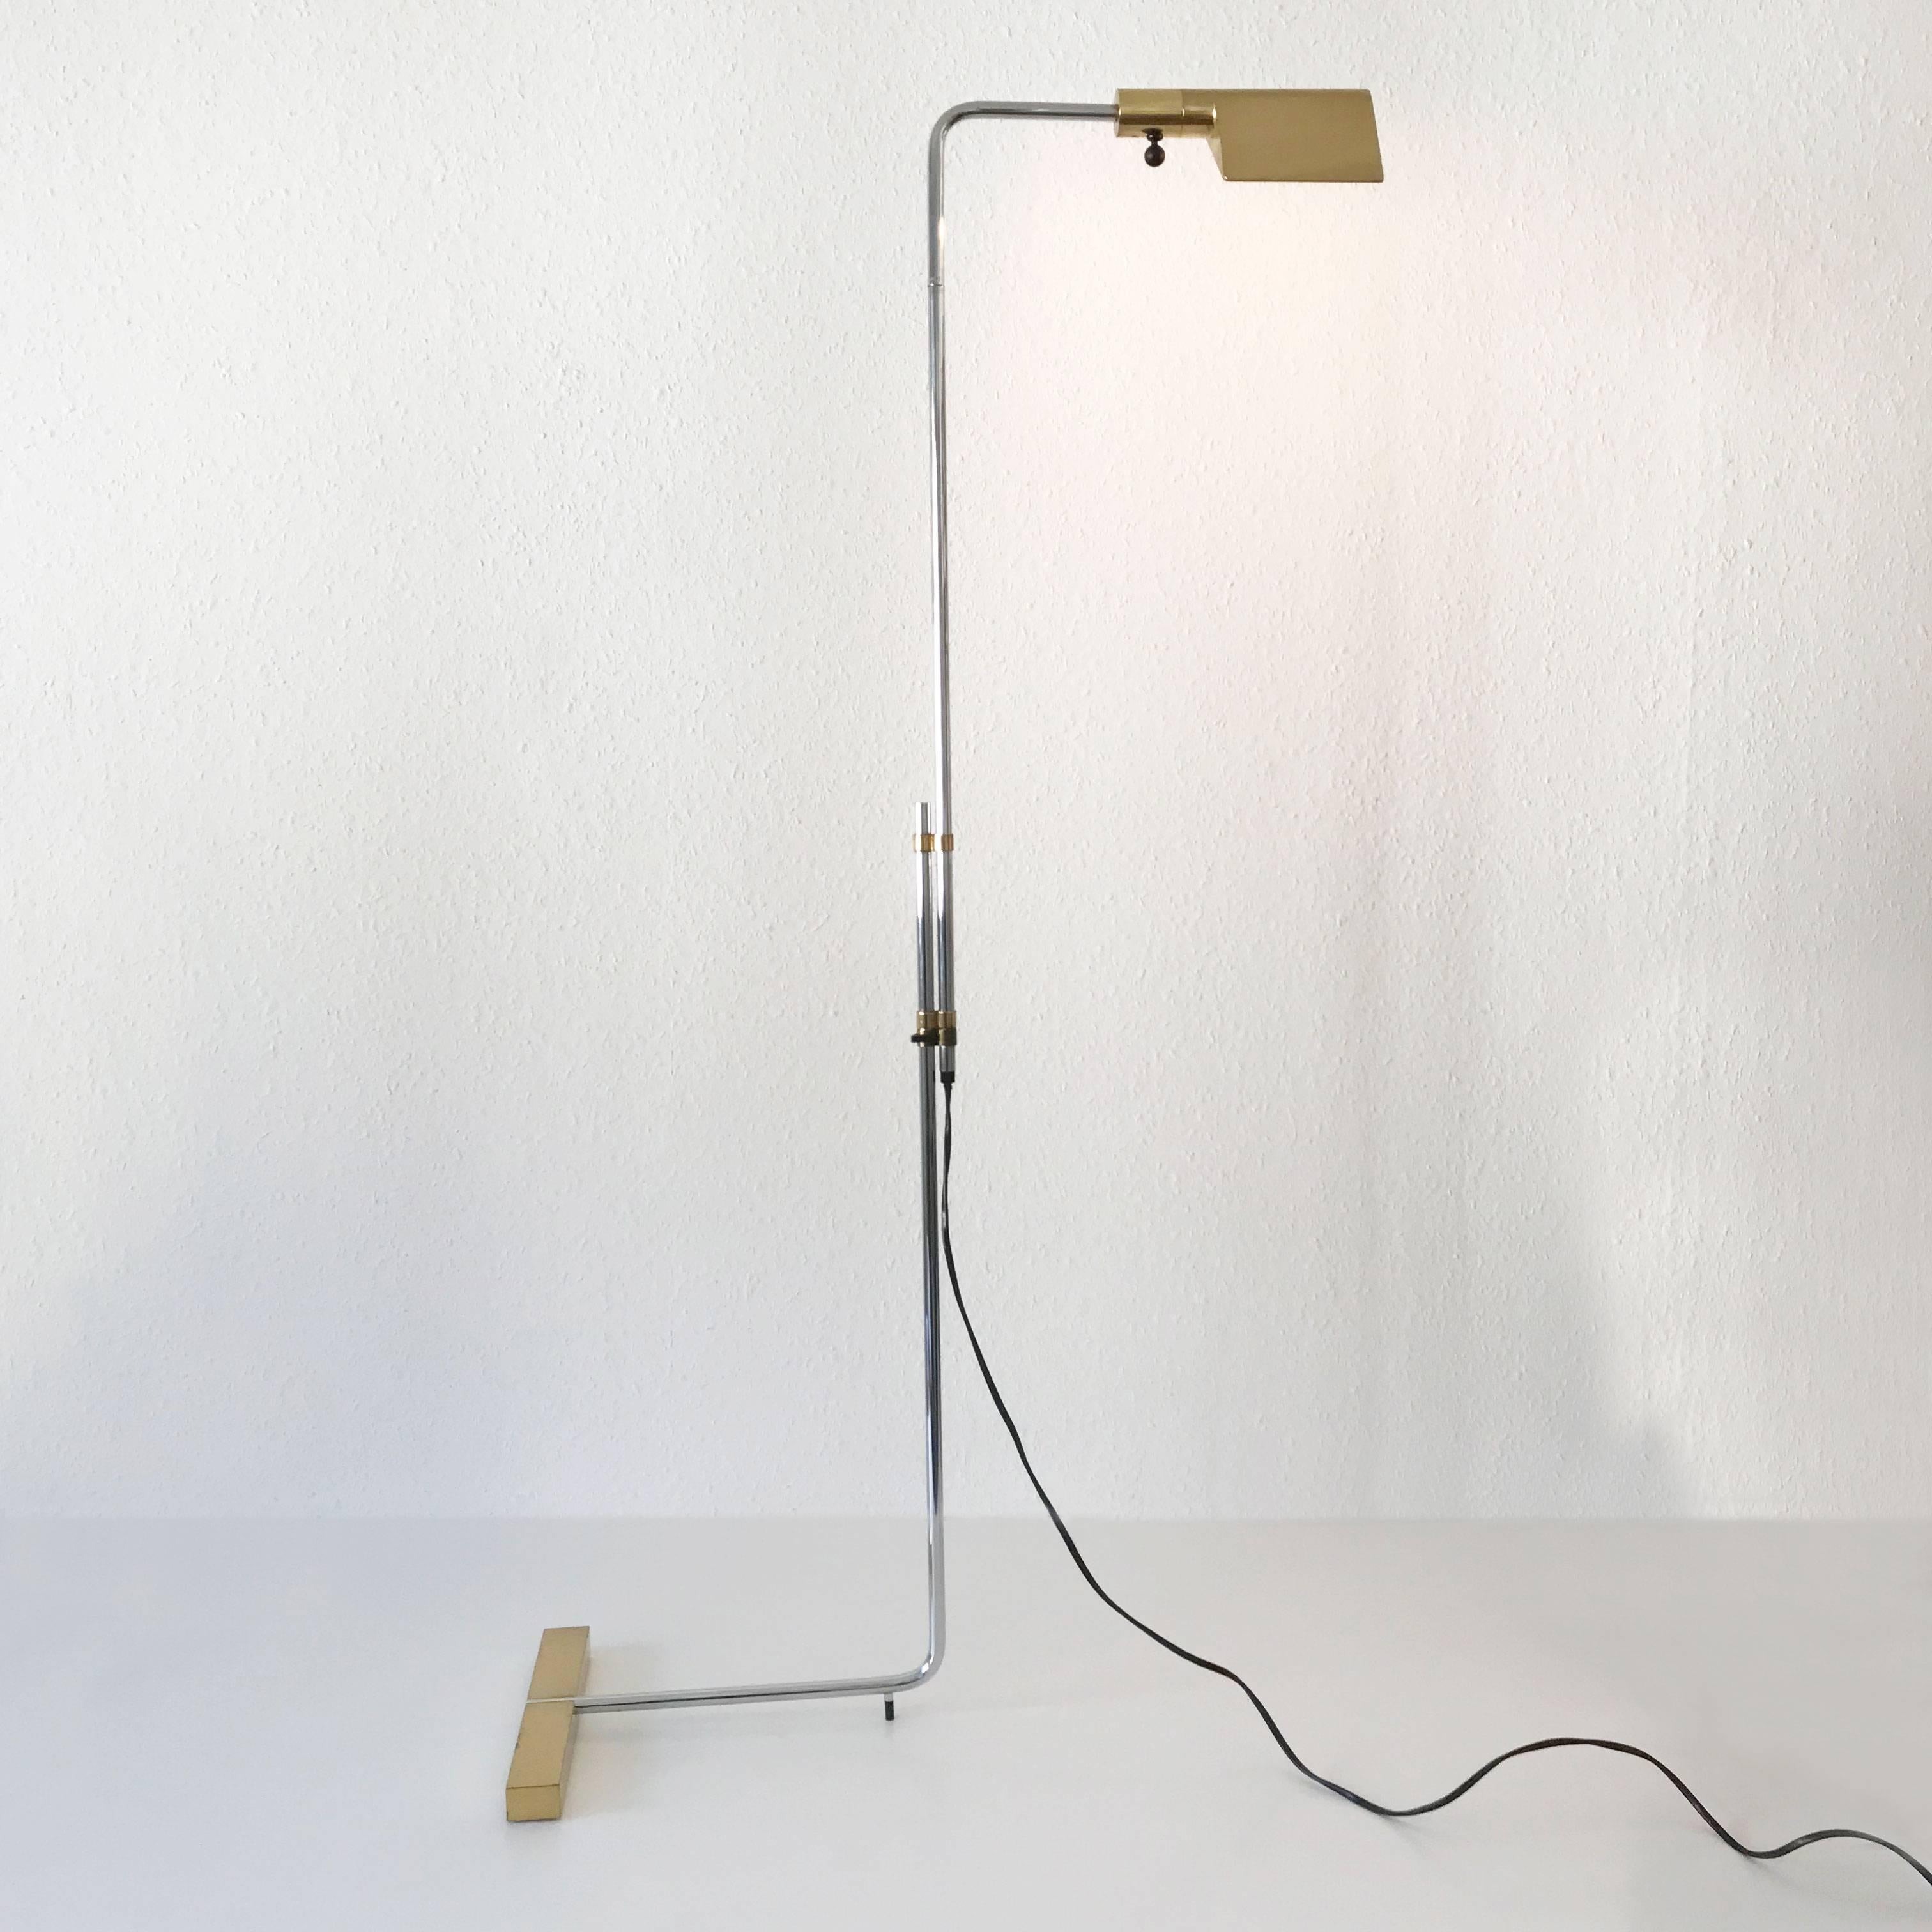 Articulated floor lamp, reading light by Cedric Hartman, 1966. Manufactured by Jack Lenor Larsen, Switzerland. With telescopic height and 360° rotating arm and shade. Heavy stand. Adjustable height 83-125 cm.
Marked beneath the base: CEDRIC HARTMAN